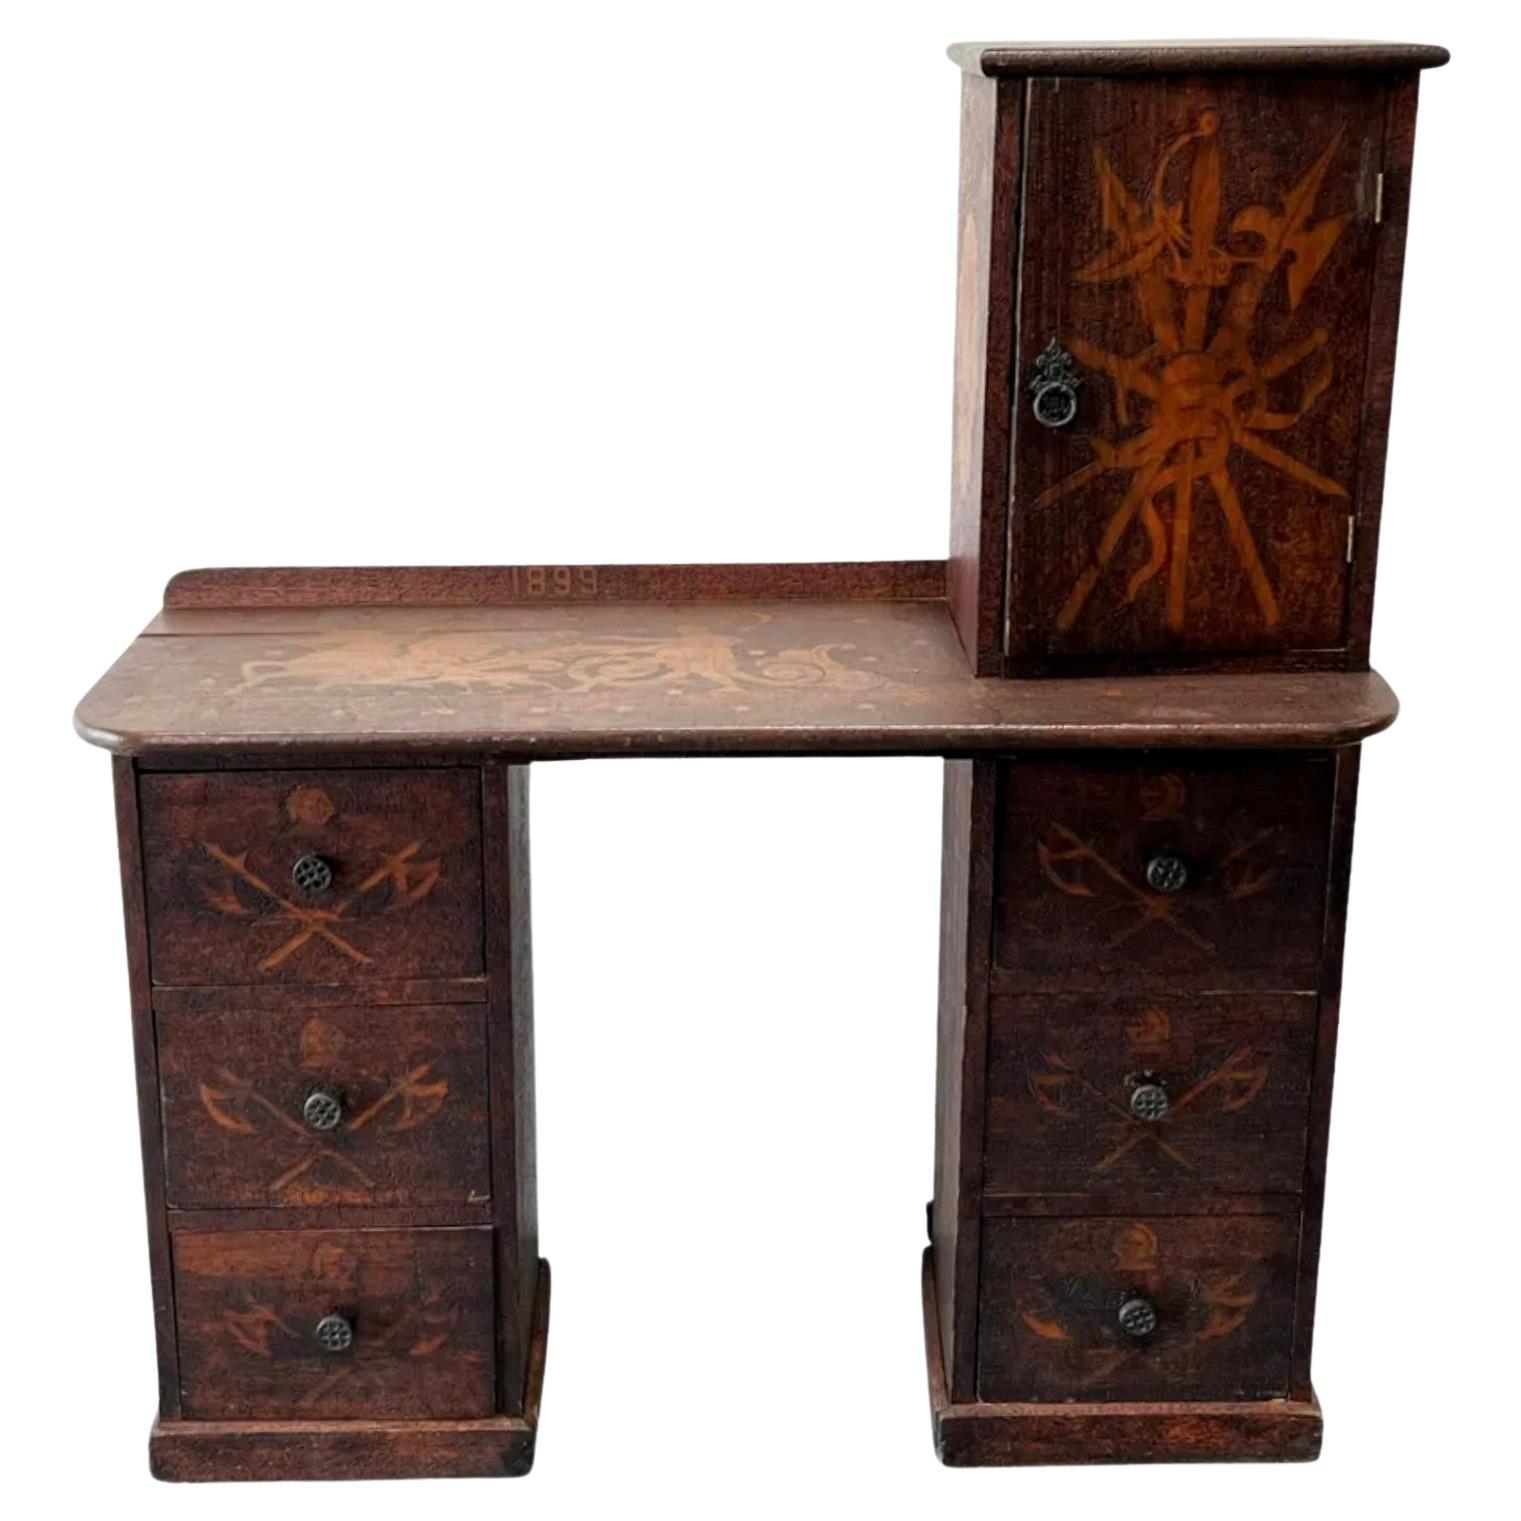 Rare Early American Country Pyrography Desk For Sale